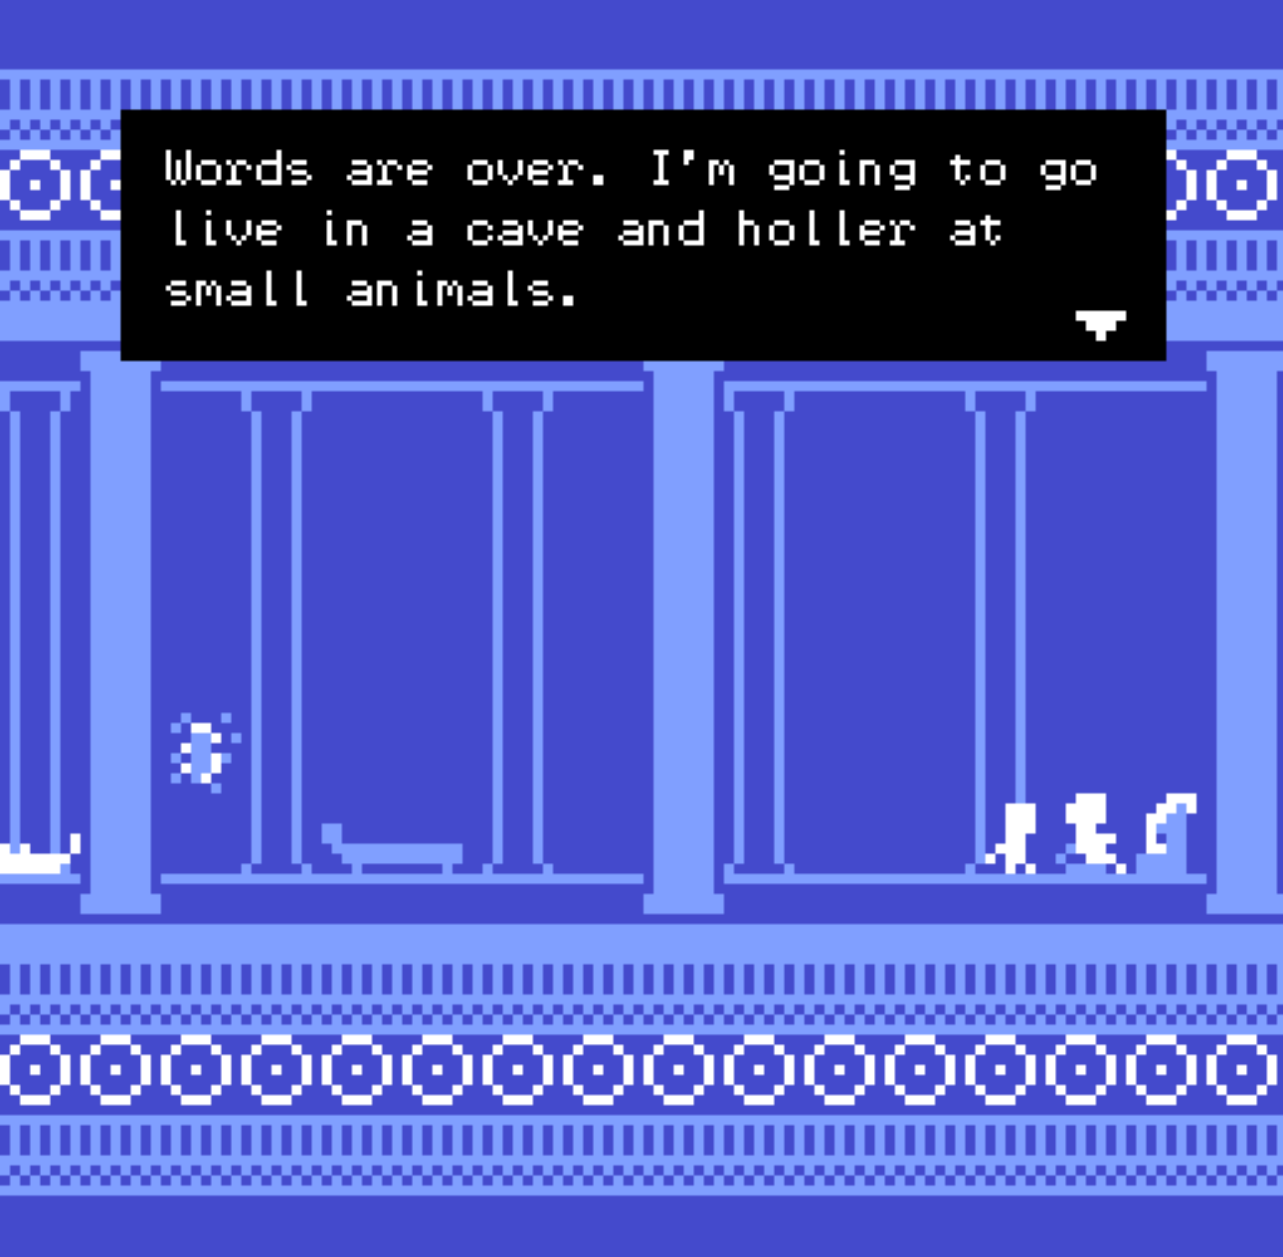 A screenshot of the video game "Lexicon Vitae" by StoneSable. The art style is 8-bit pixels, with the only colours being used are white and two shades of blue, one light and one dark. The screenshot is set in a room resembling Ancient Greek architecture, with various stone columns. A black text box is on the top of the image with white pixelated text. The text box reads "Words are over. I'm going to go live in a cave and holler at small animals." Two pixelated humans are on the right side of the image, the one on the left standing, and the one on the right sitting at a desk with a piece of paper in front of them. A pixelated cat is on the left side of the image, and a sparkling object floats to the right of the cat.